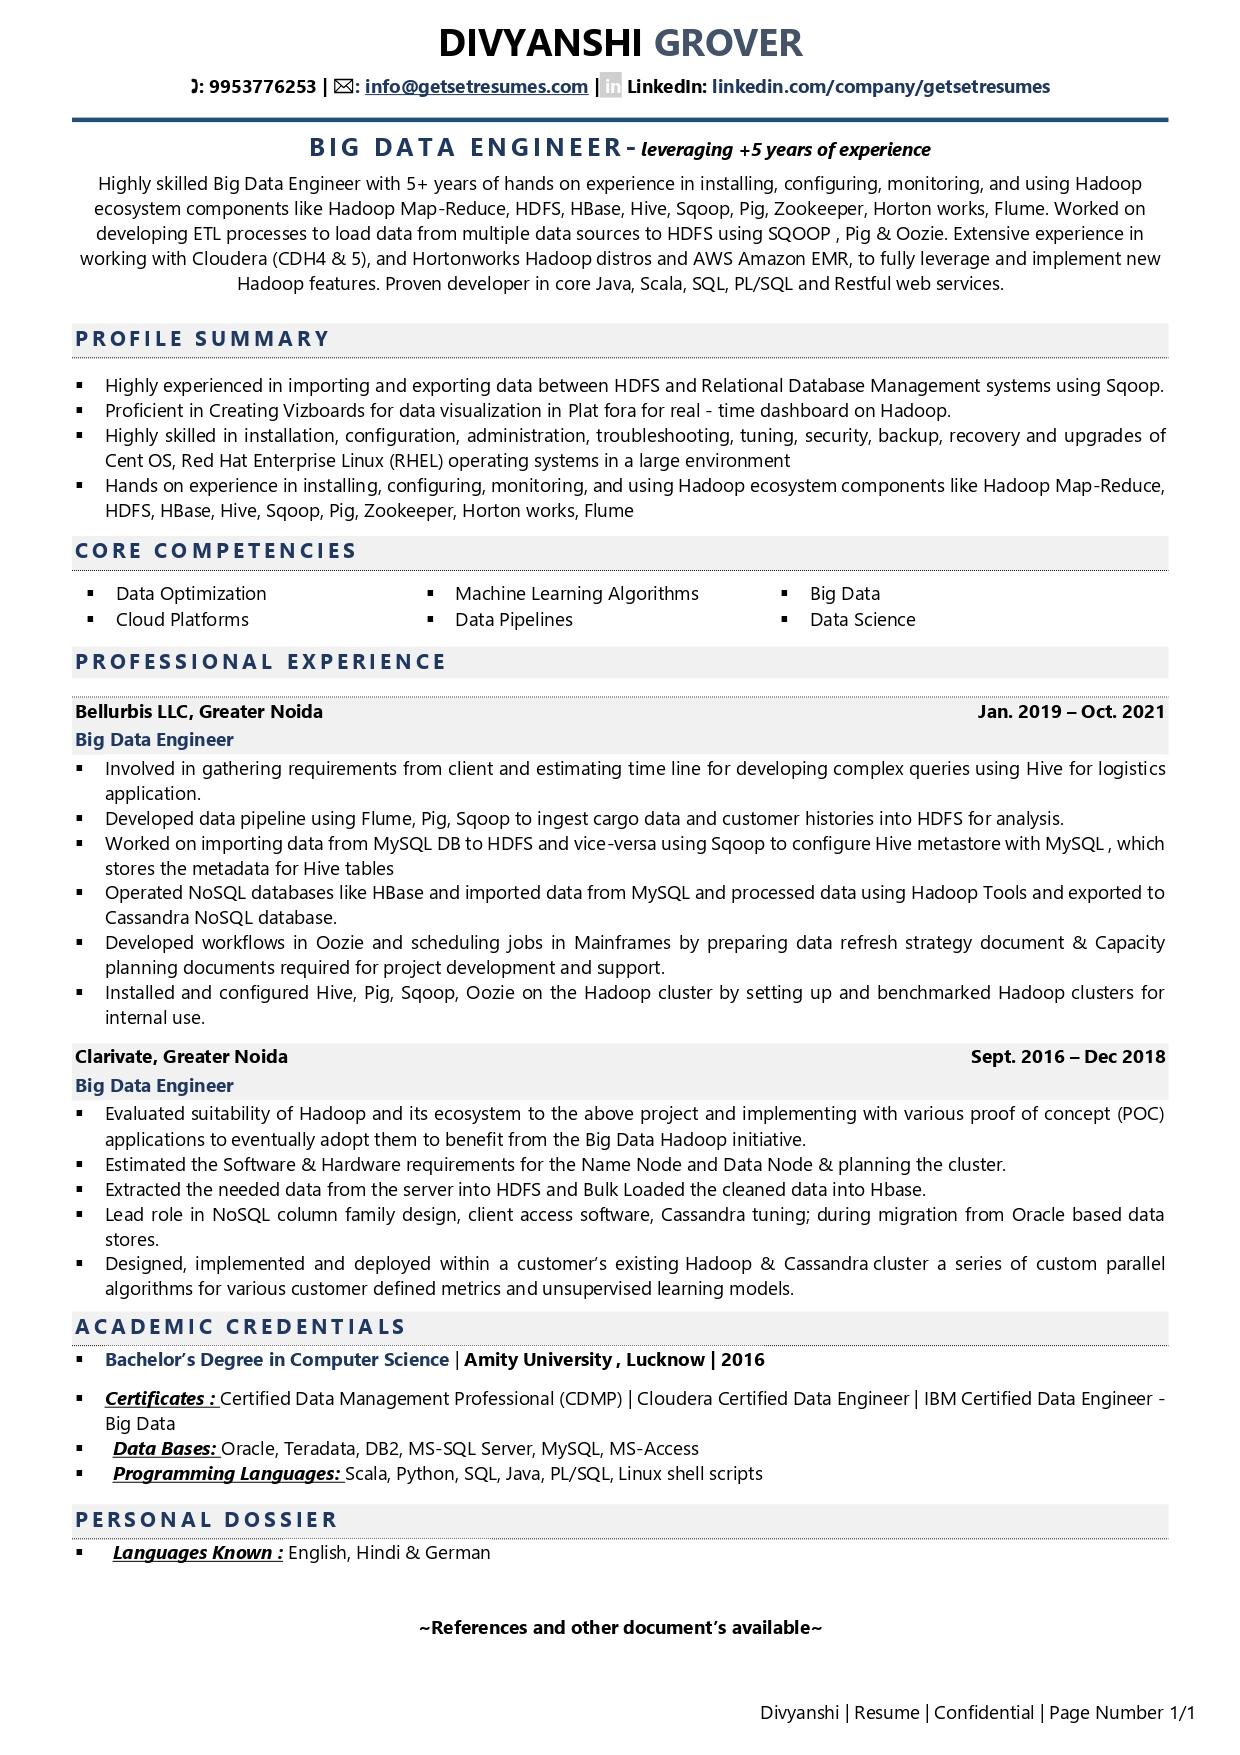 Big Data Resume Sample Word Format Resume Example Gallery Hot Sex Picture 8629